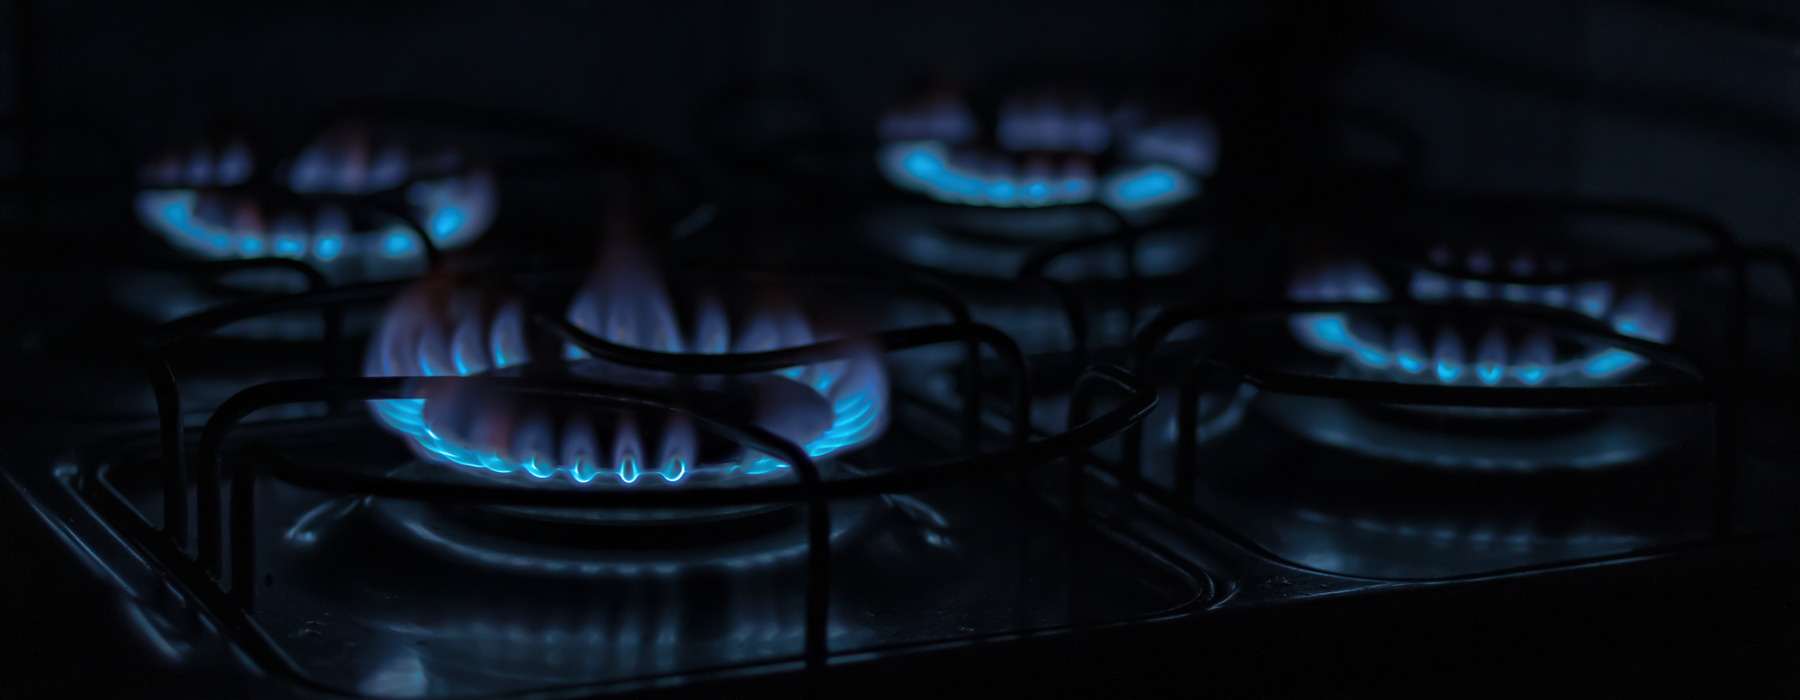 Difference between Gas and Electric Stoves